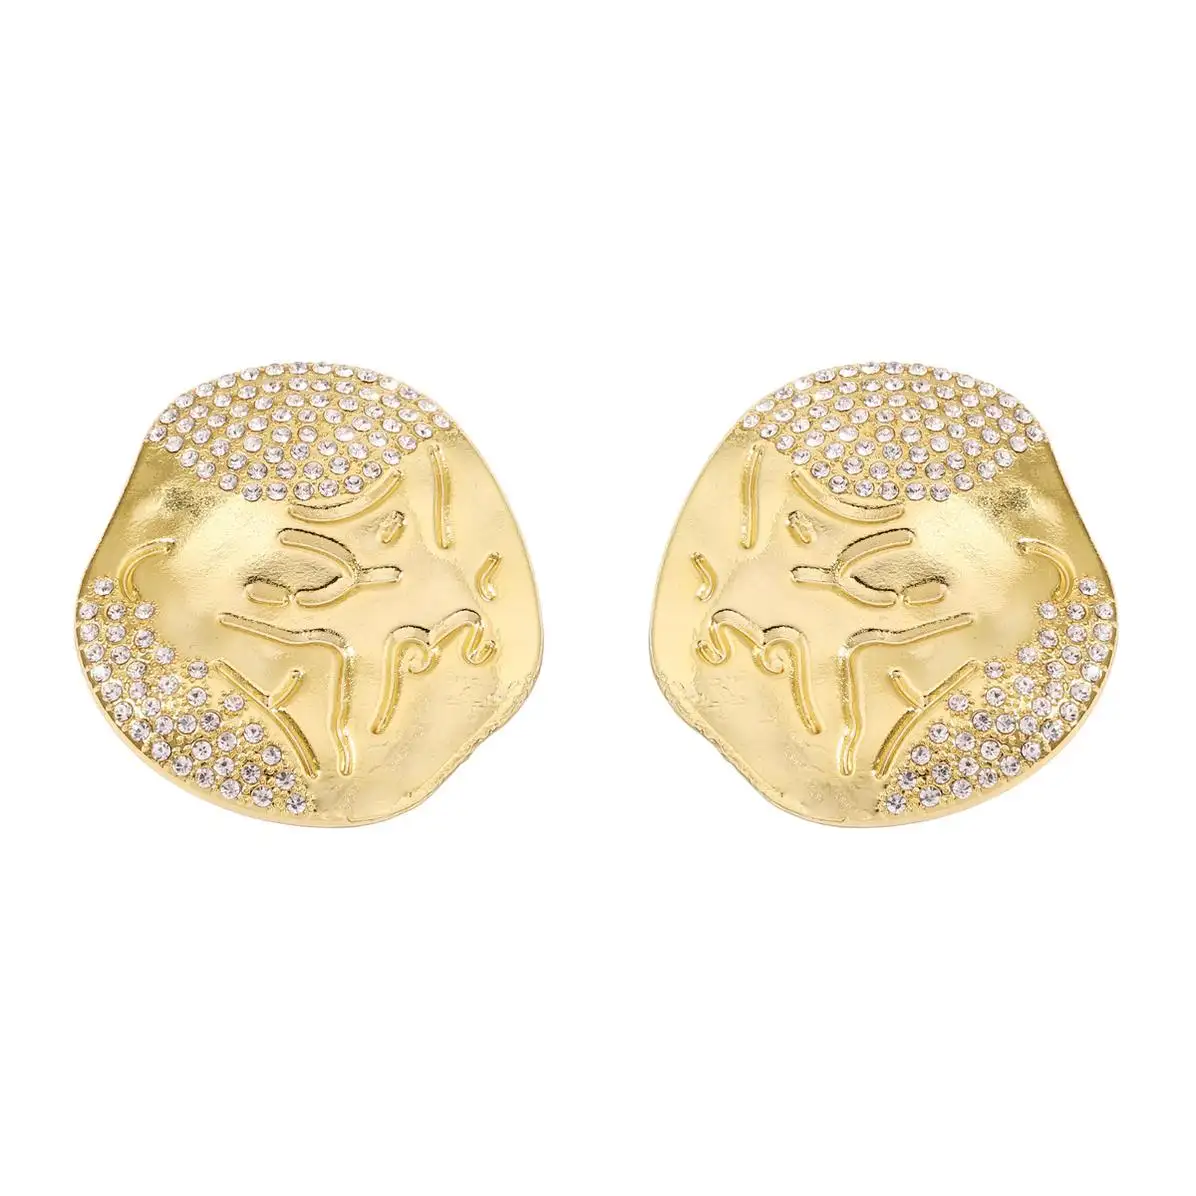 Stud Earrings Studs Crystal Earing Designer Fashion 14 18K Gold Plated African Making Korean Bow No Hole Earrings